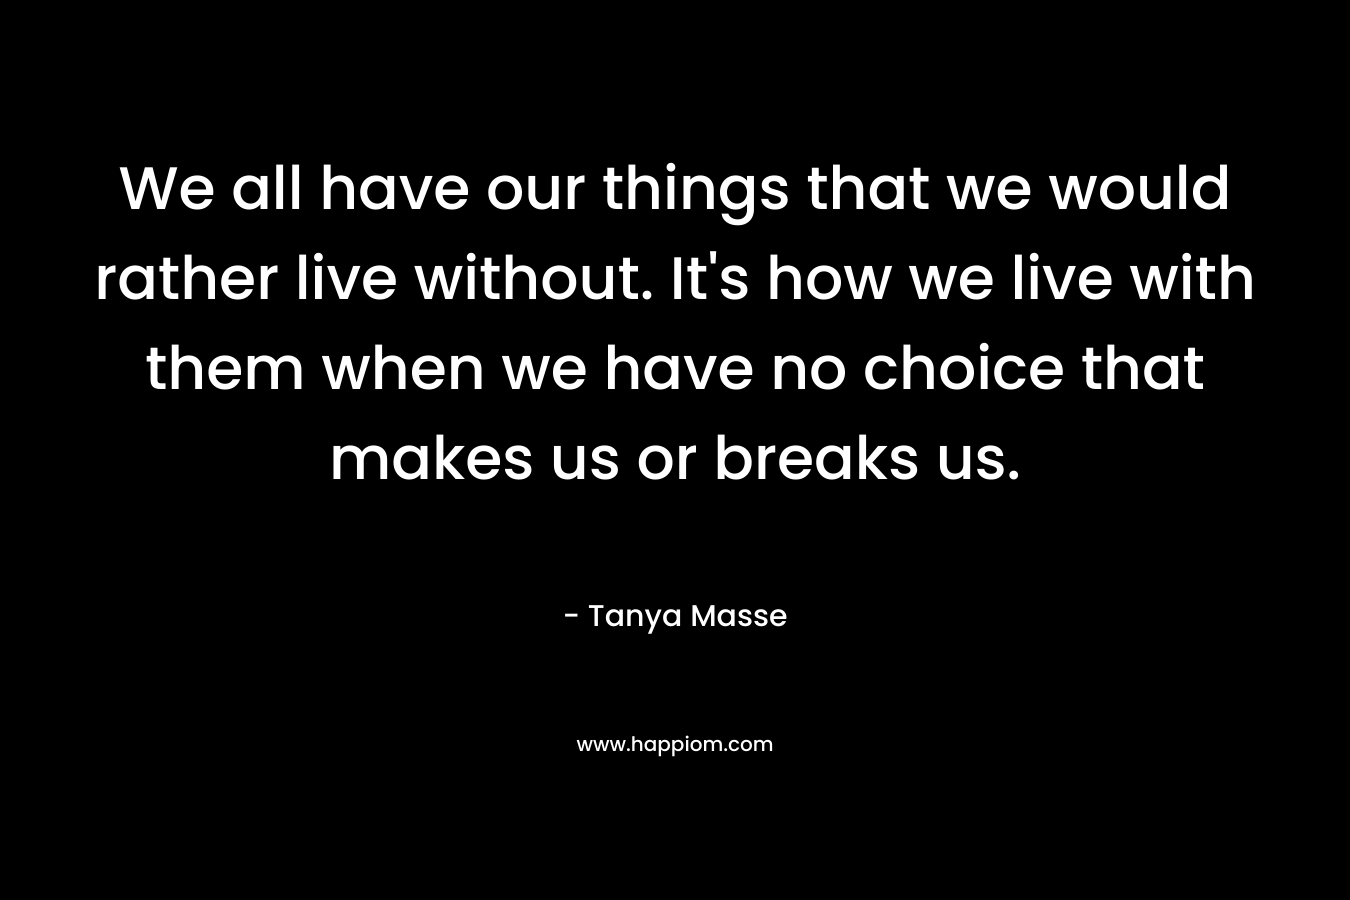 We all have our things that we would rather live without. It's how we live with them when we have no choice that makes us or breaks us.